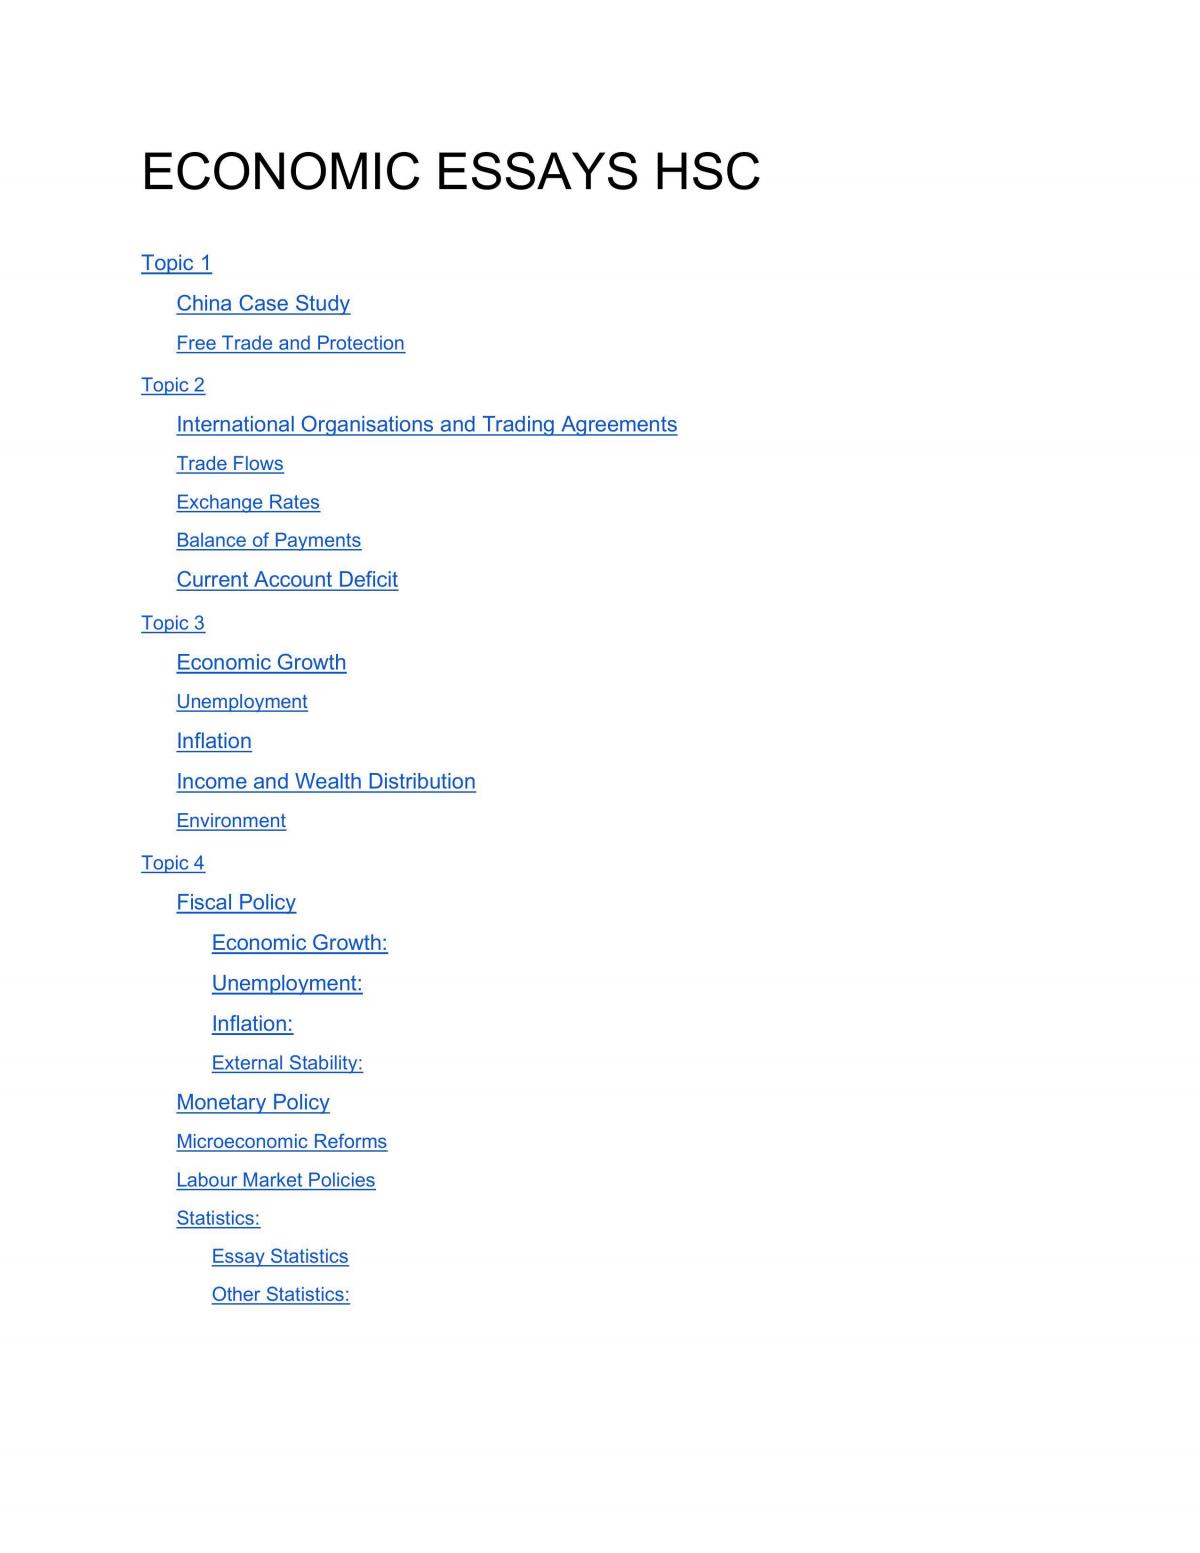 economics essay competitions for high school students